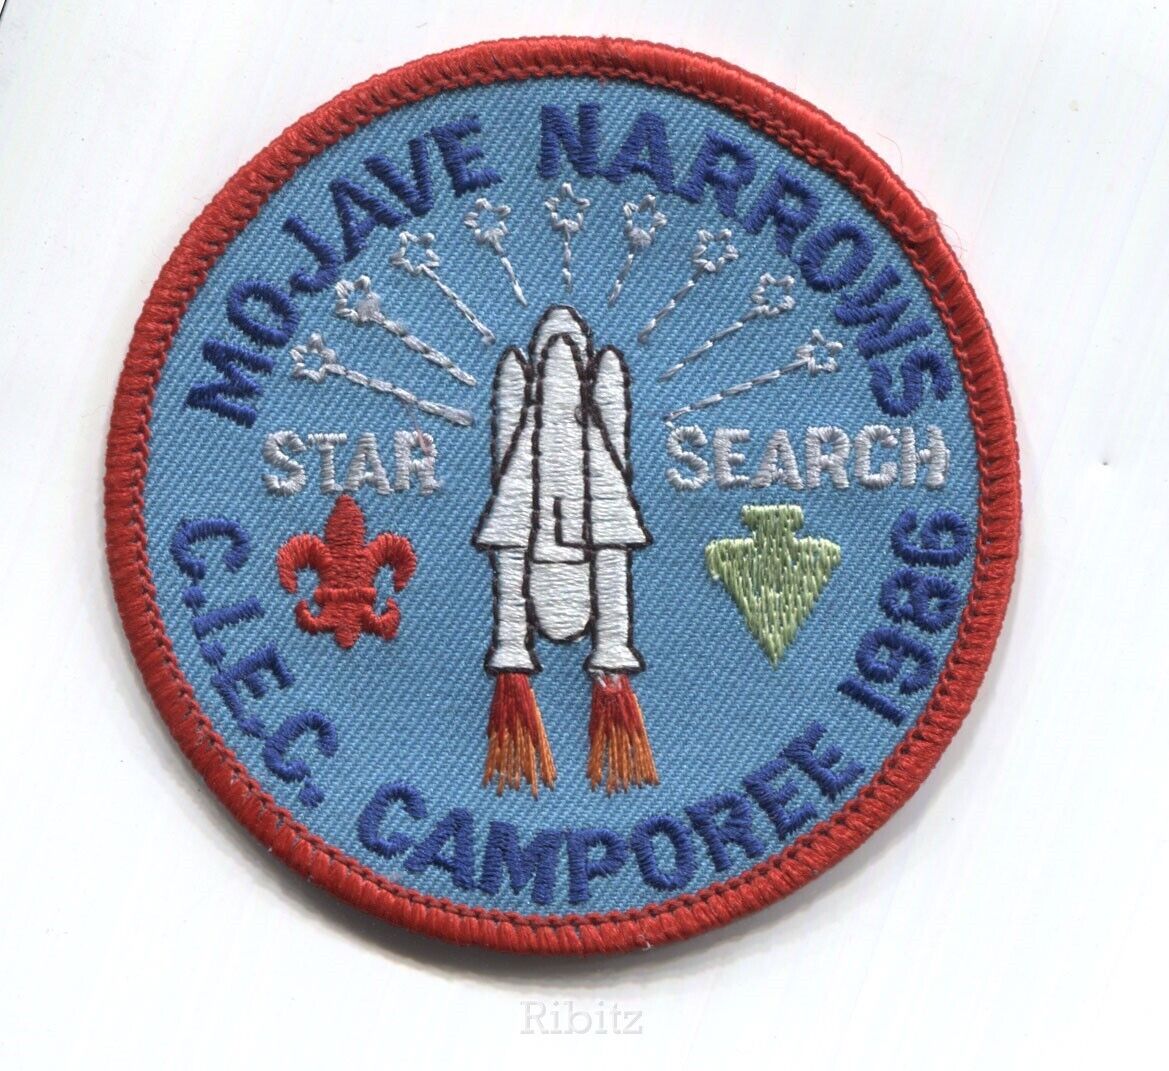 BSA CIEC Mojave Narrows Challenger Space Shuttle 1986 scout patch - twill RIGHT